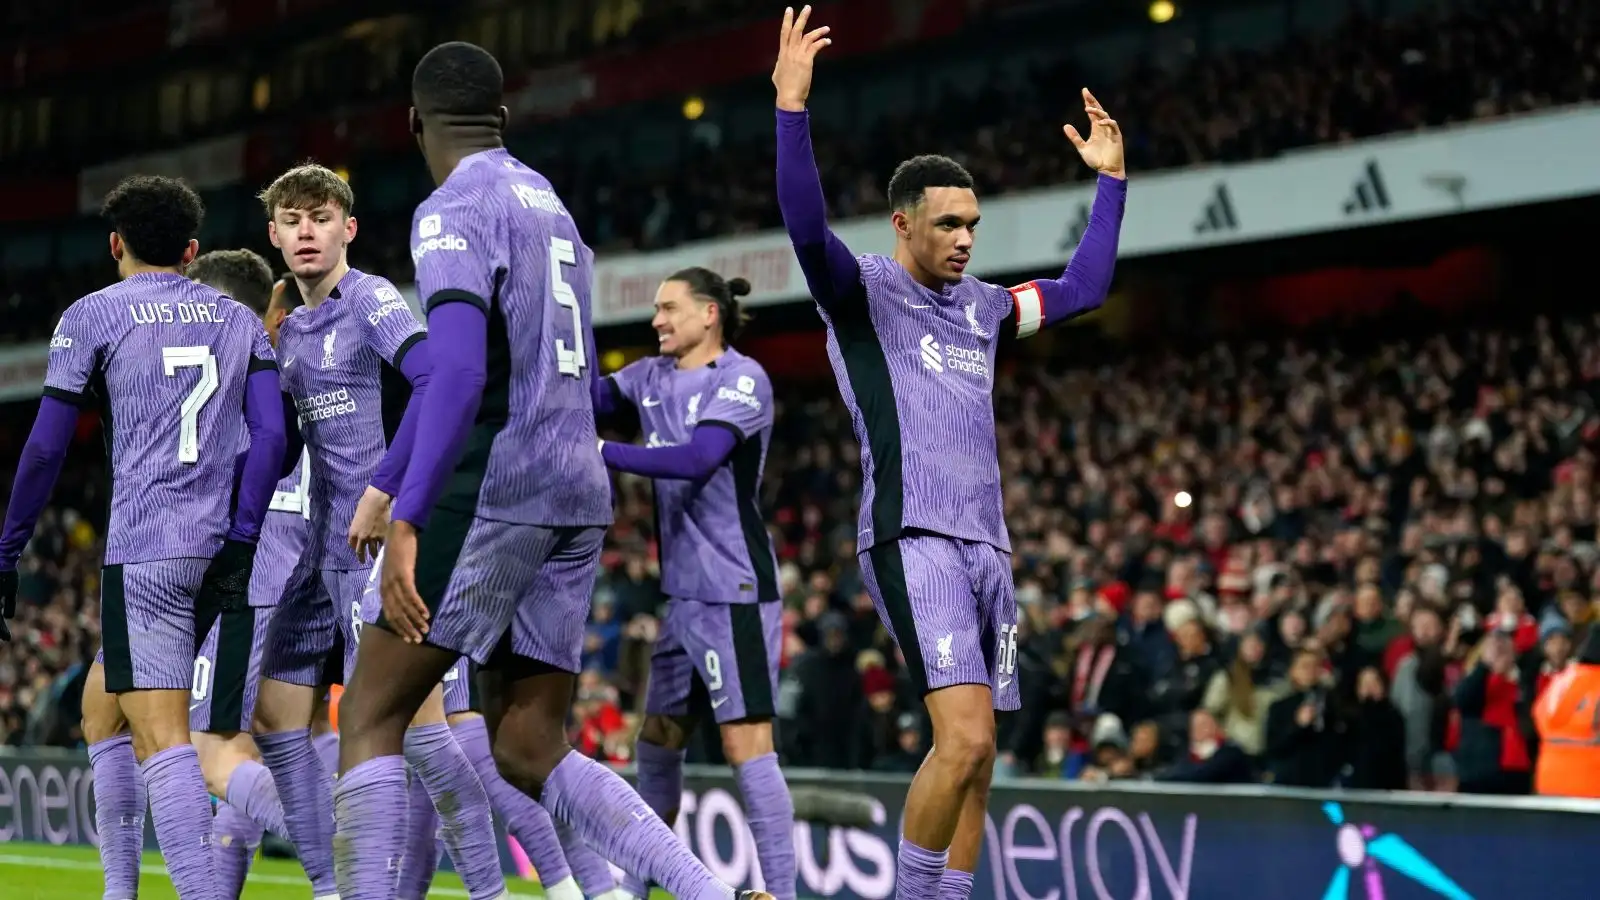 Trent Alexander-Arnold memorializes Liverpool's initially ambition against Collection.